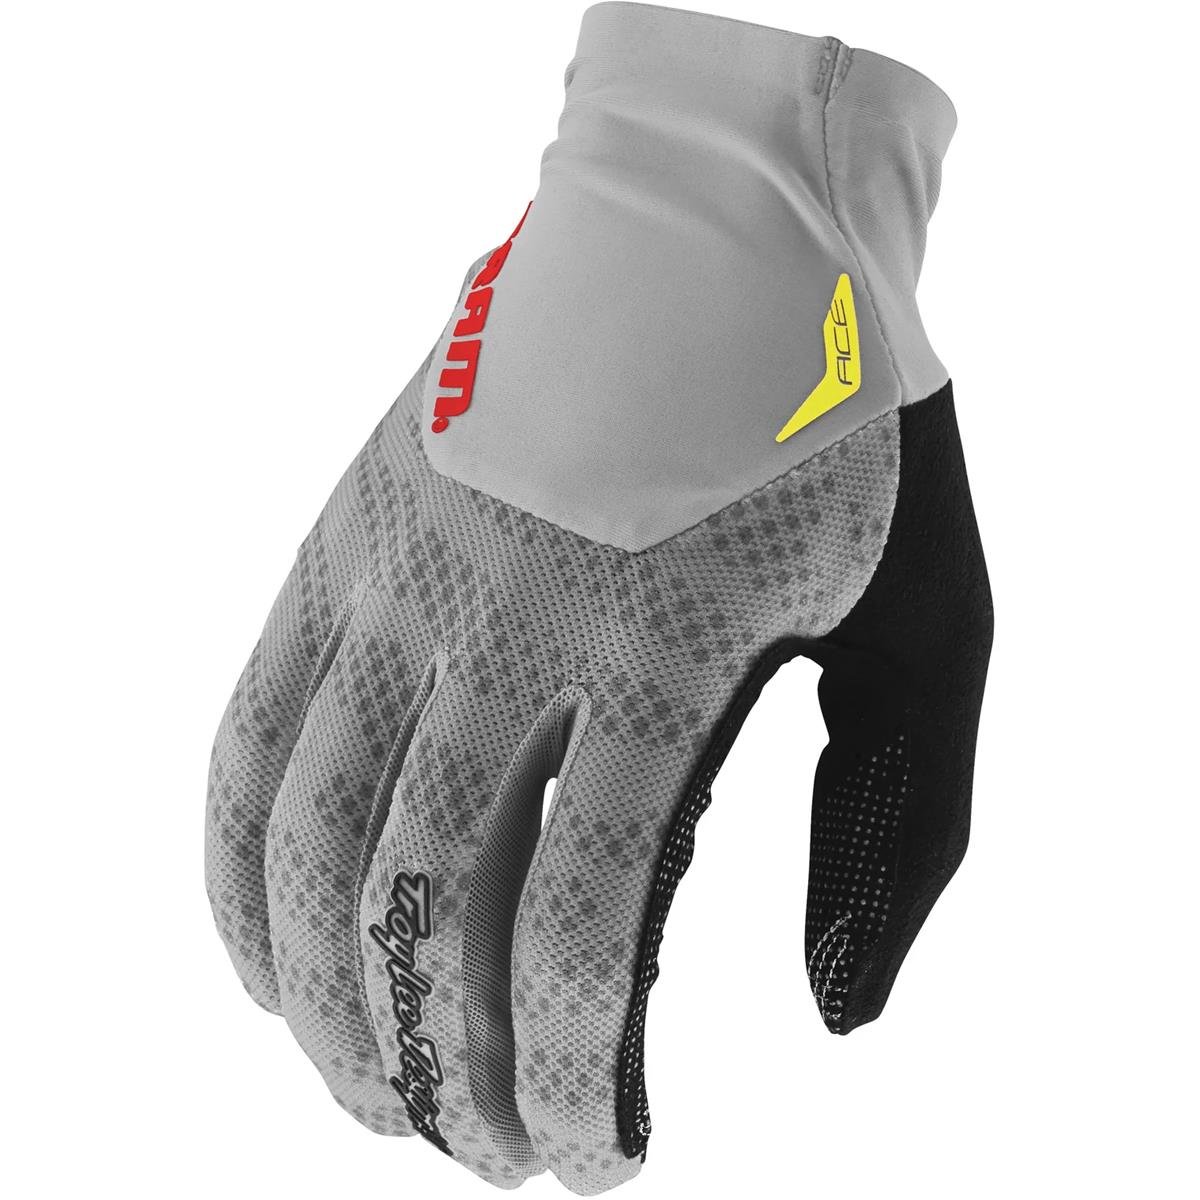 Troy Lee Designs MTB-Handschuhe Ace Sram - Shifted Cement